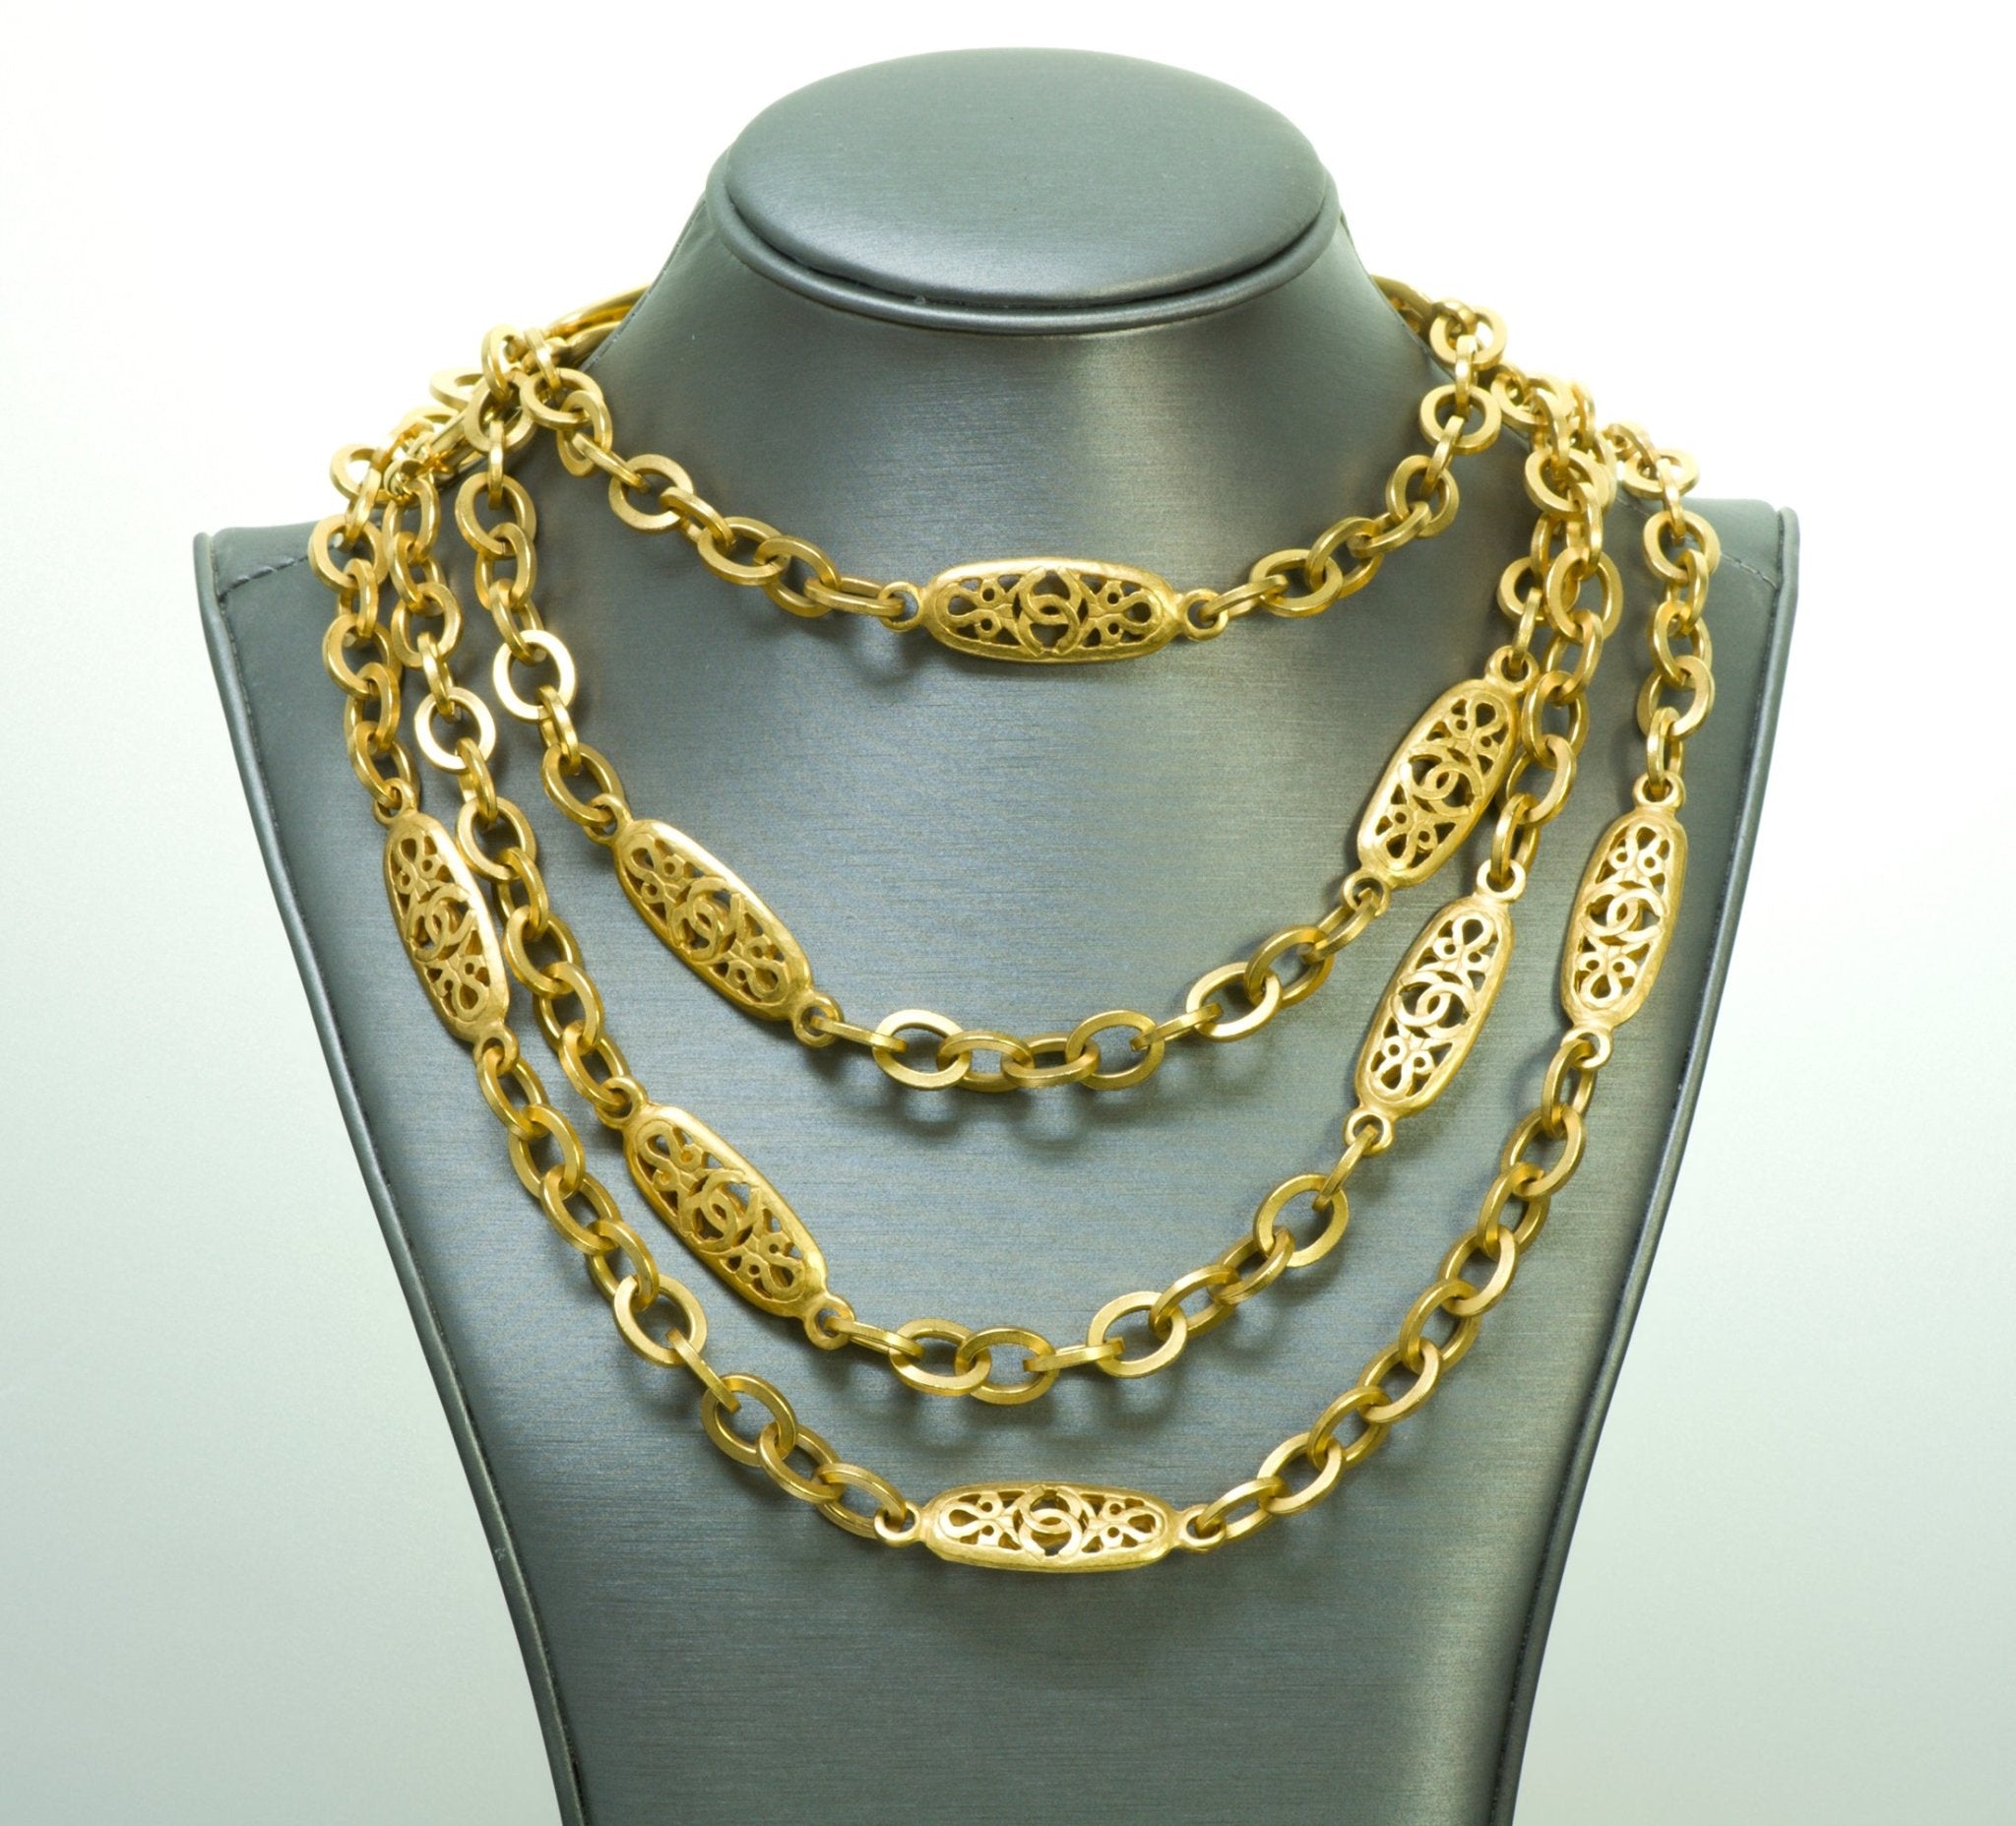 Chanel Spring 1995 CC Infinity Chain Necklace - DSF Antique Jewelry